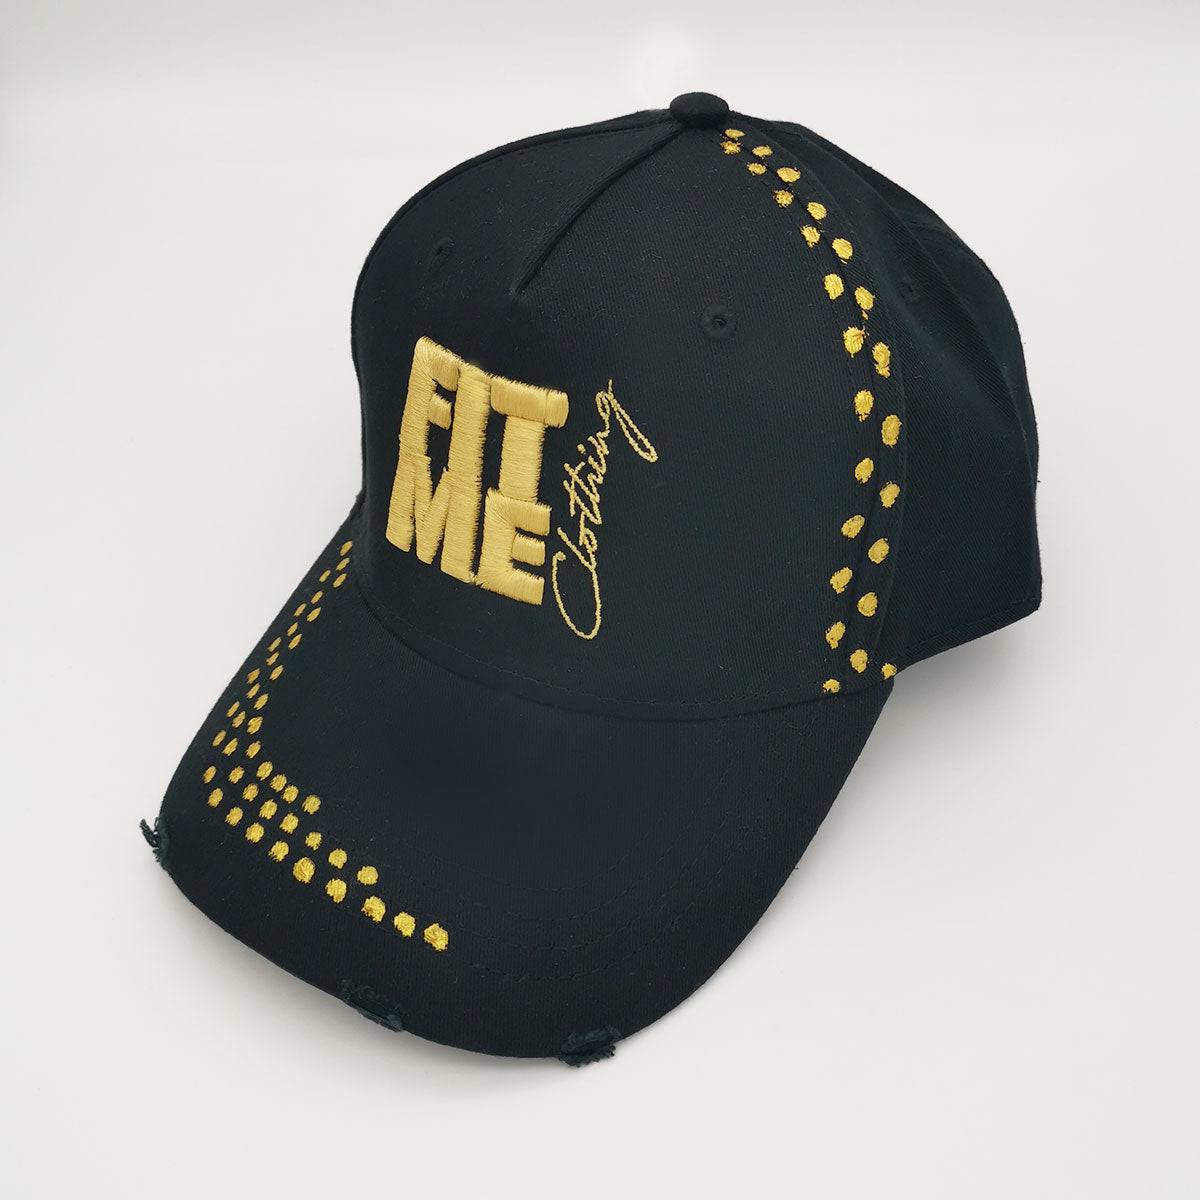 Custom Black And Gold Distressed Cap - FitMe Clothing